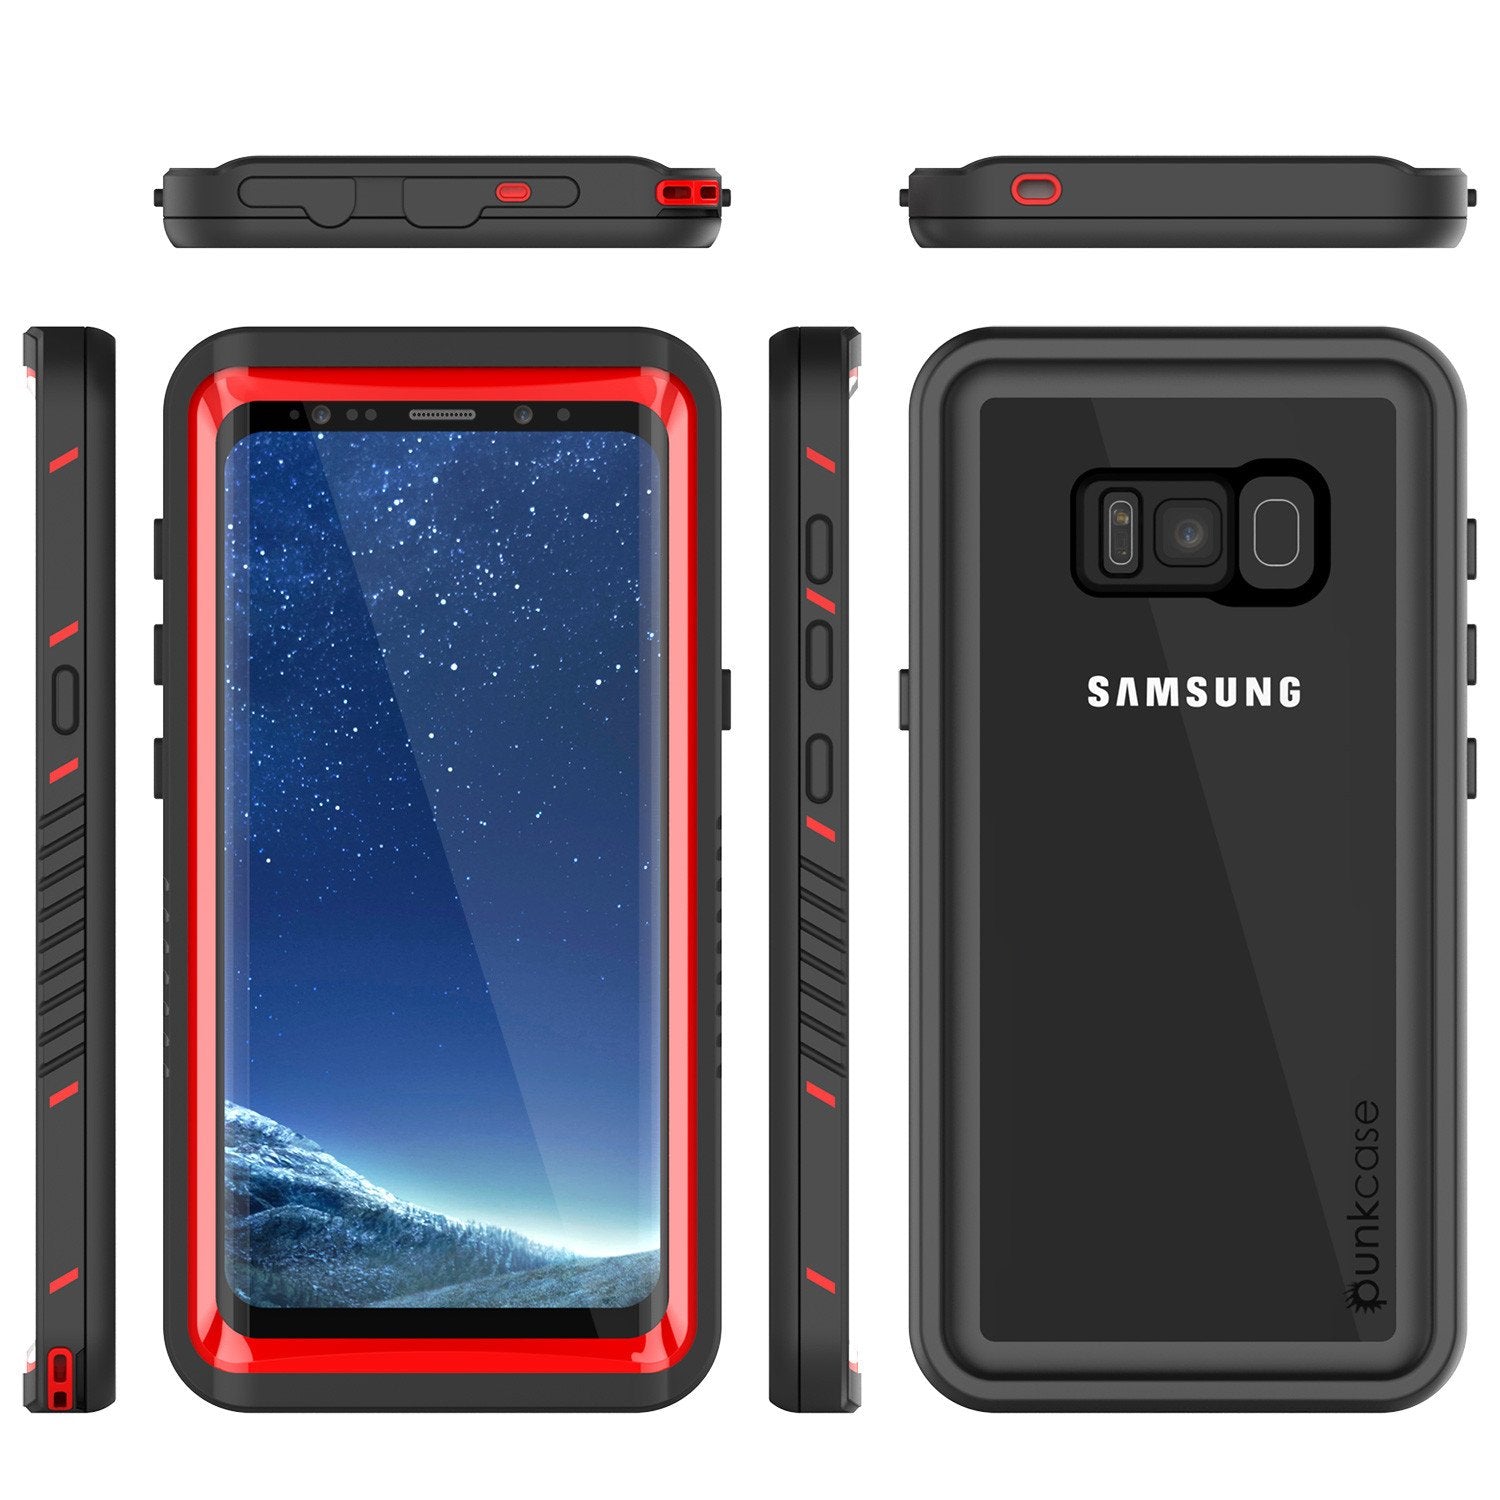 Galaxy S8 PLUS Case, Punkcase [Extreme Series] Armor Red Cover